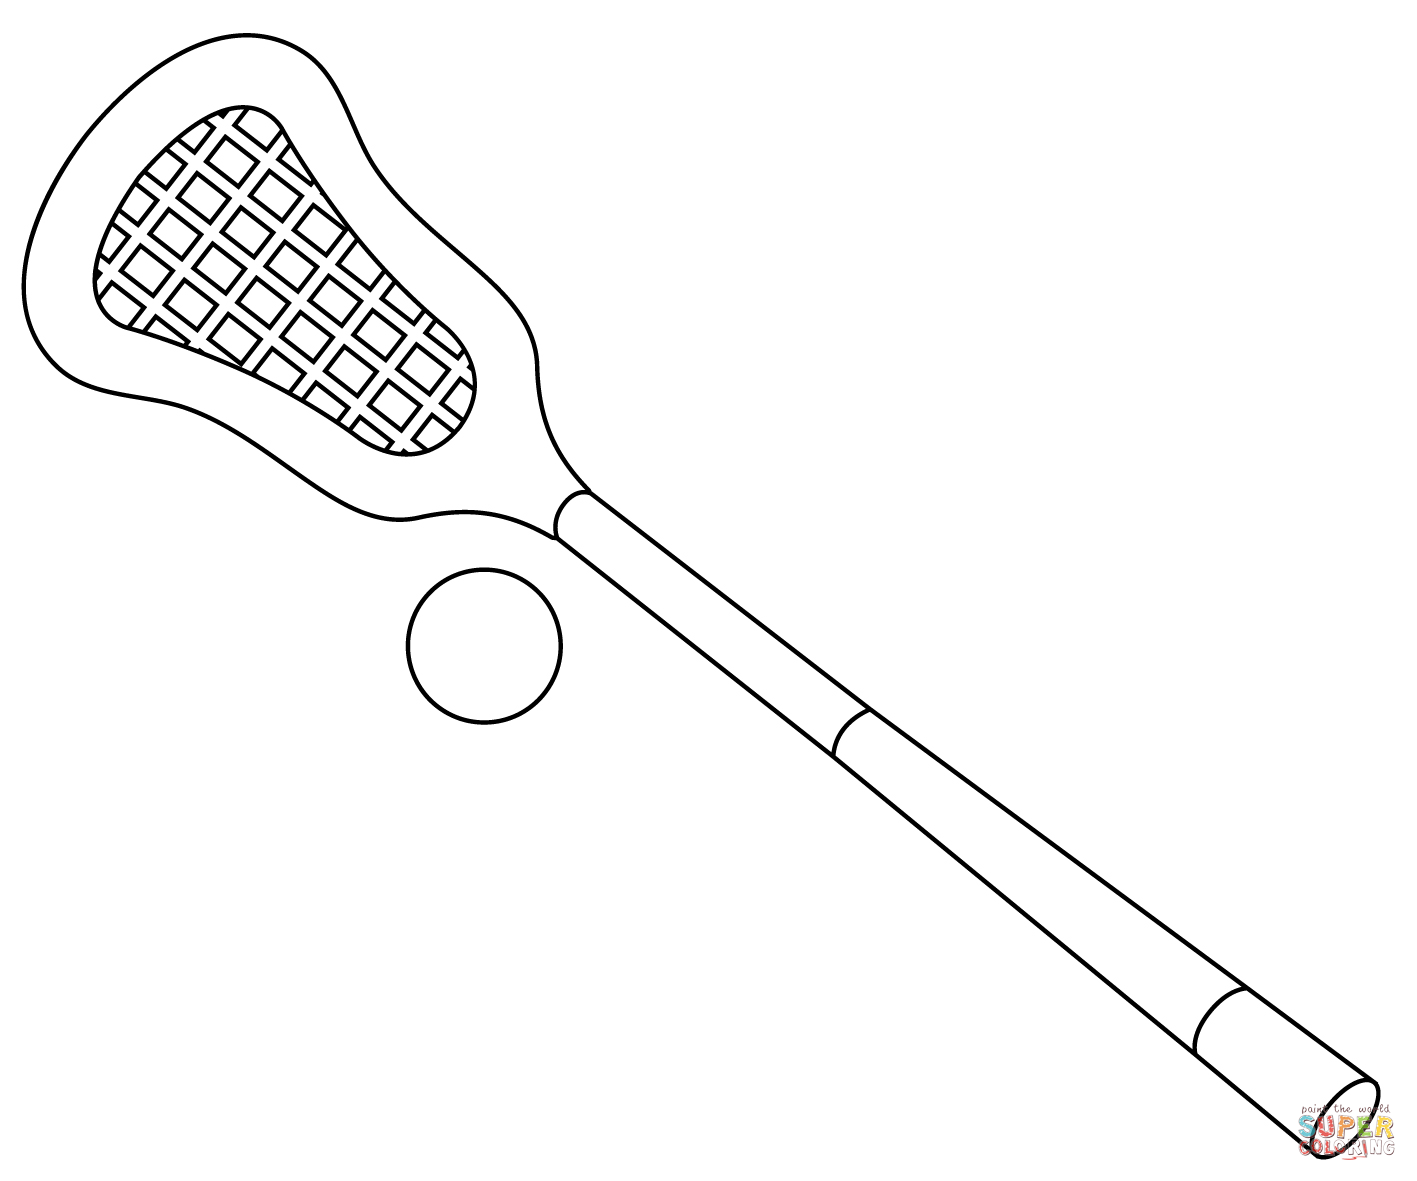 Lacrosse rocket coloring page free printable coloring pages